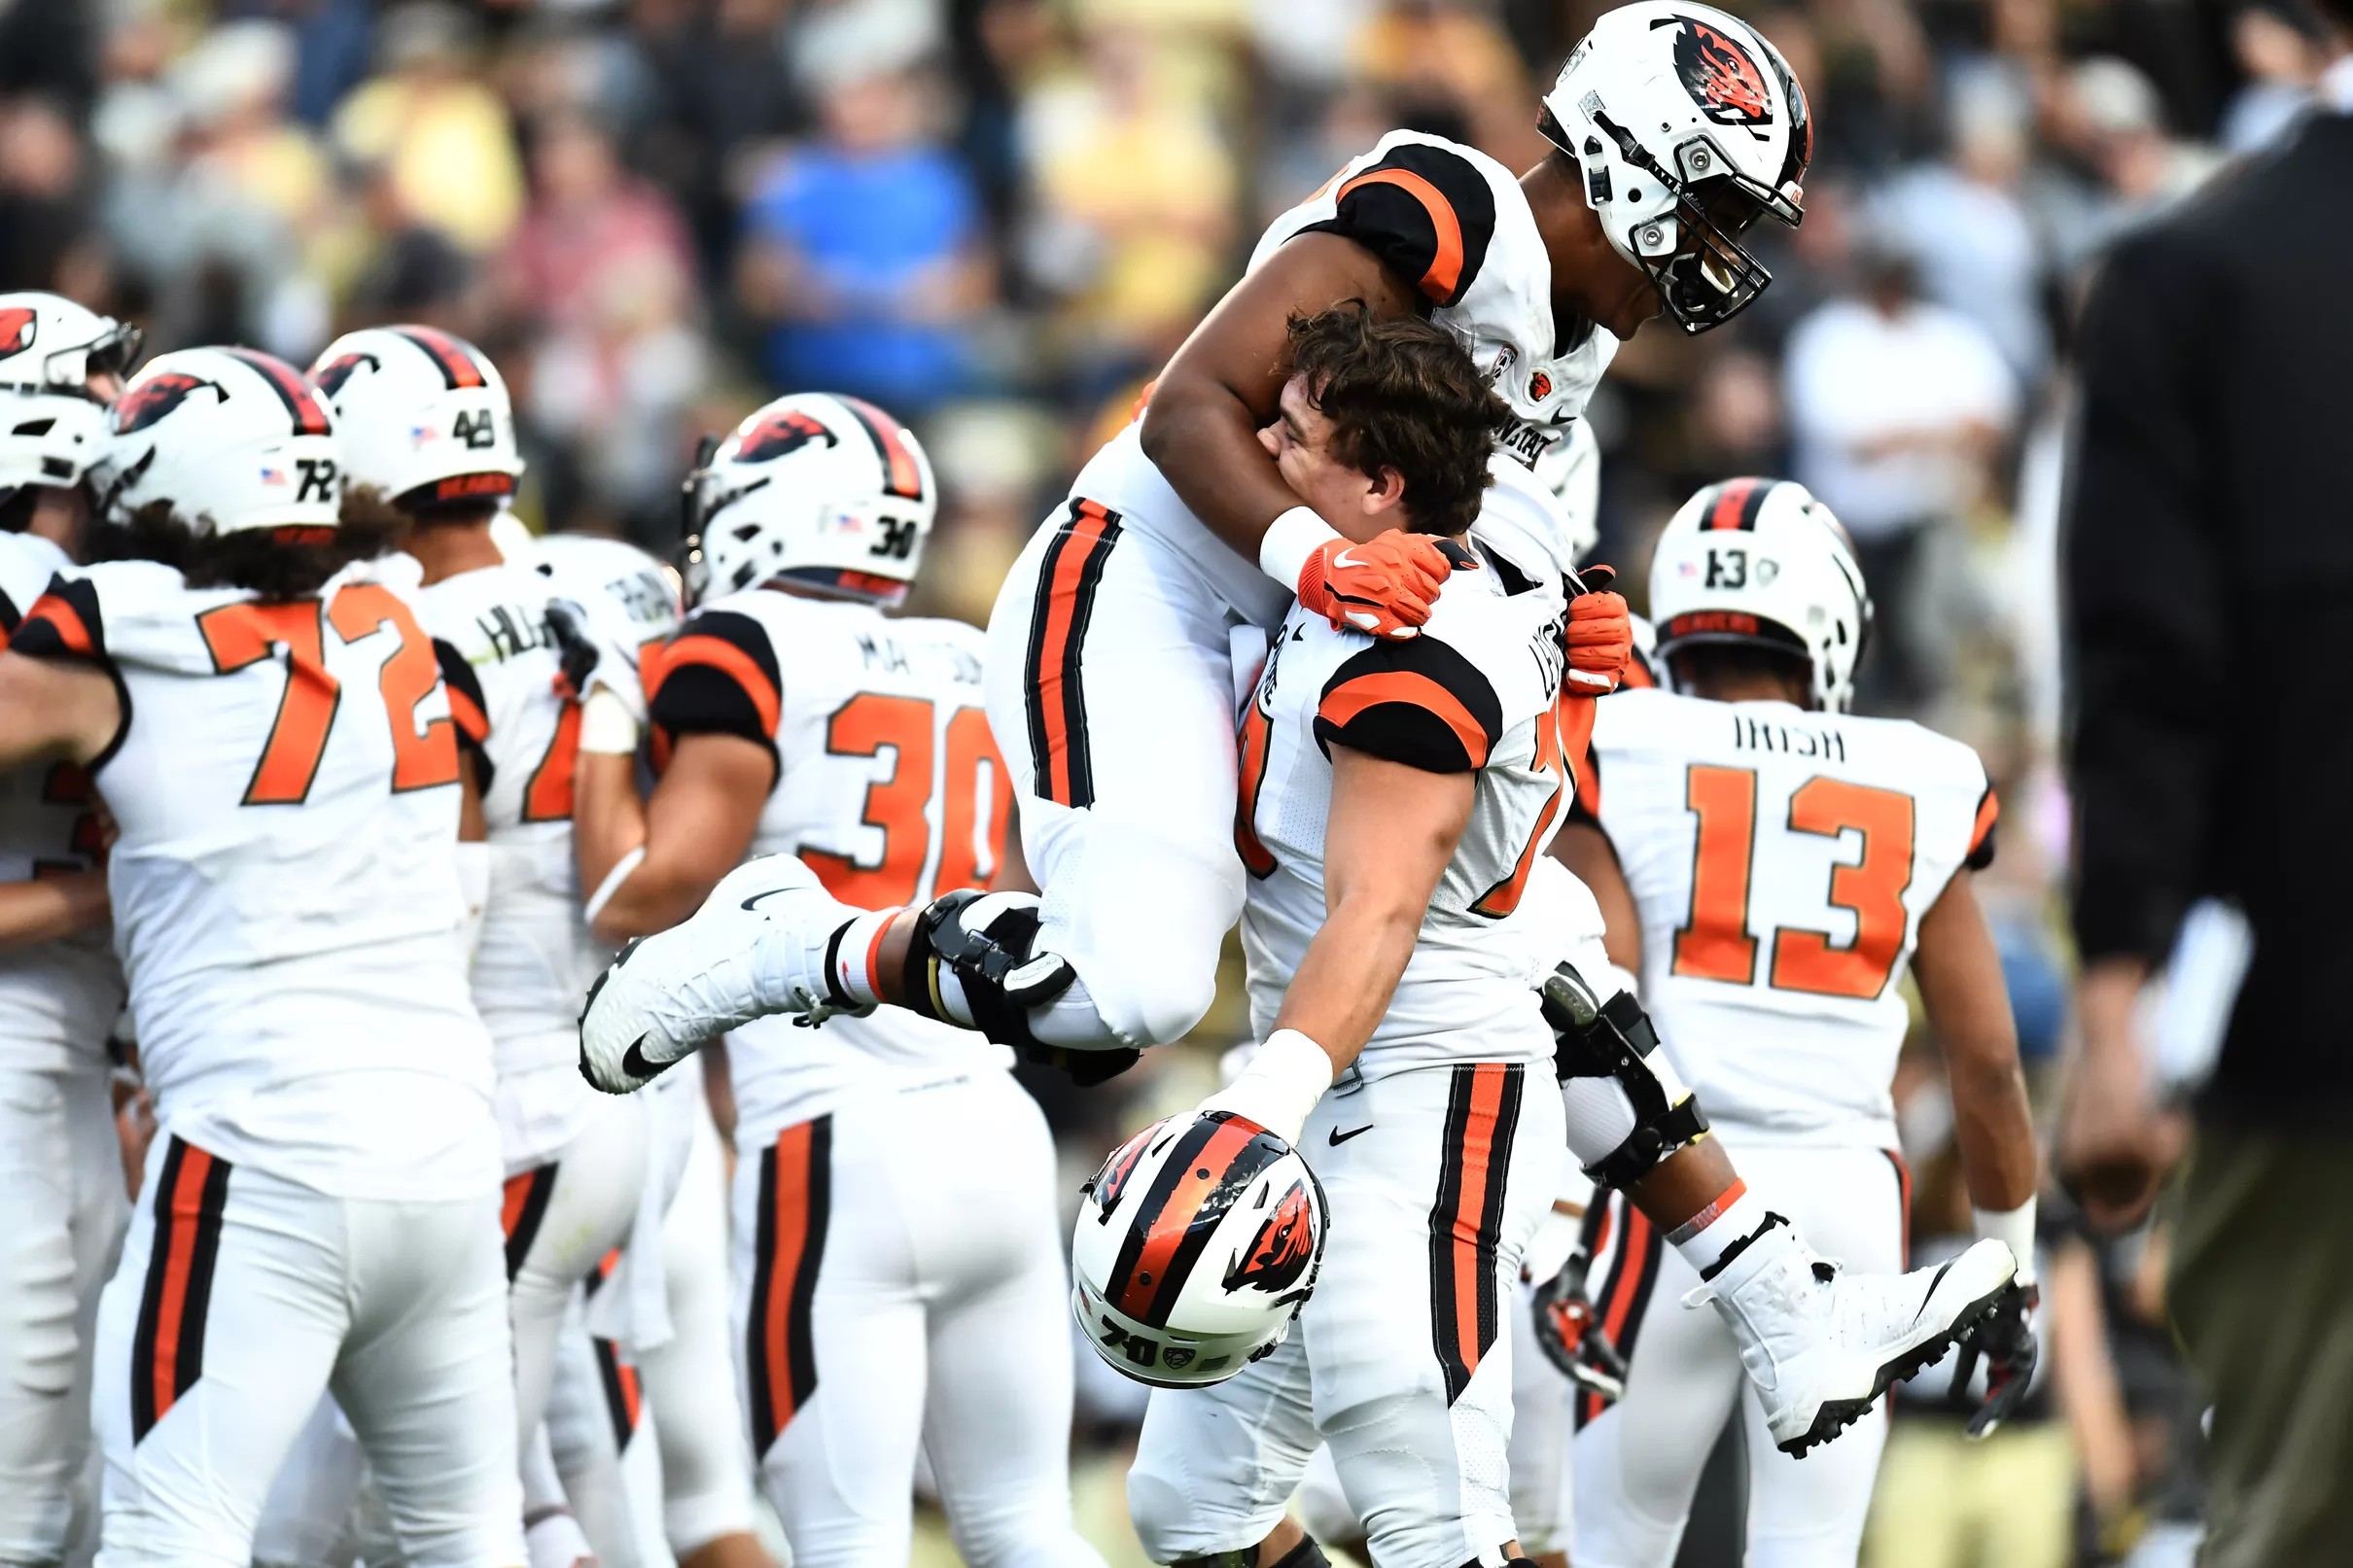 Oregon State Football: Beavers Release 2019 Schedule